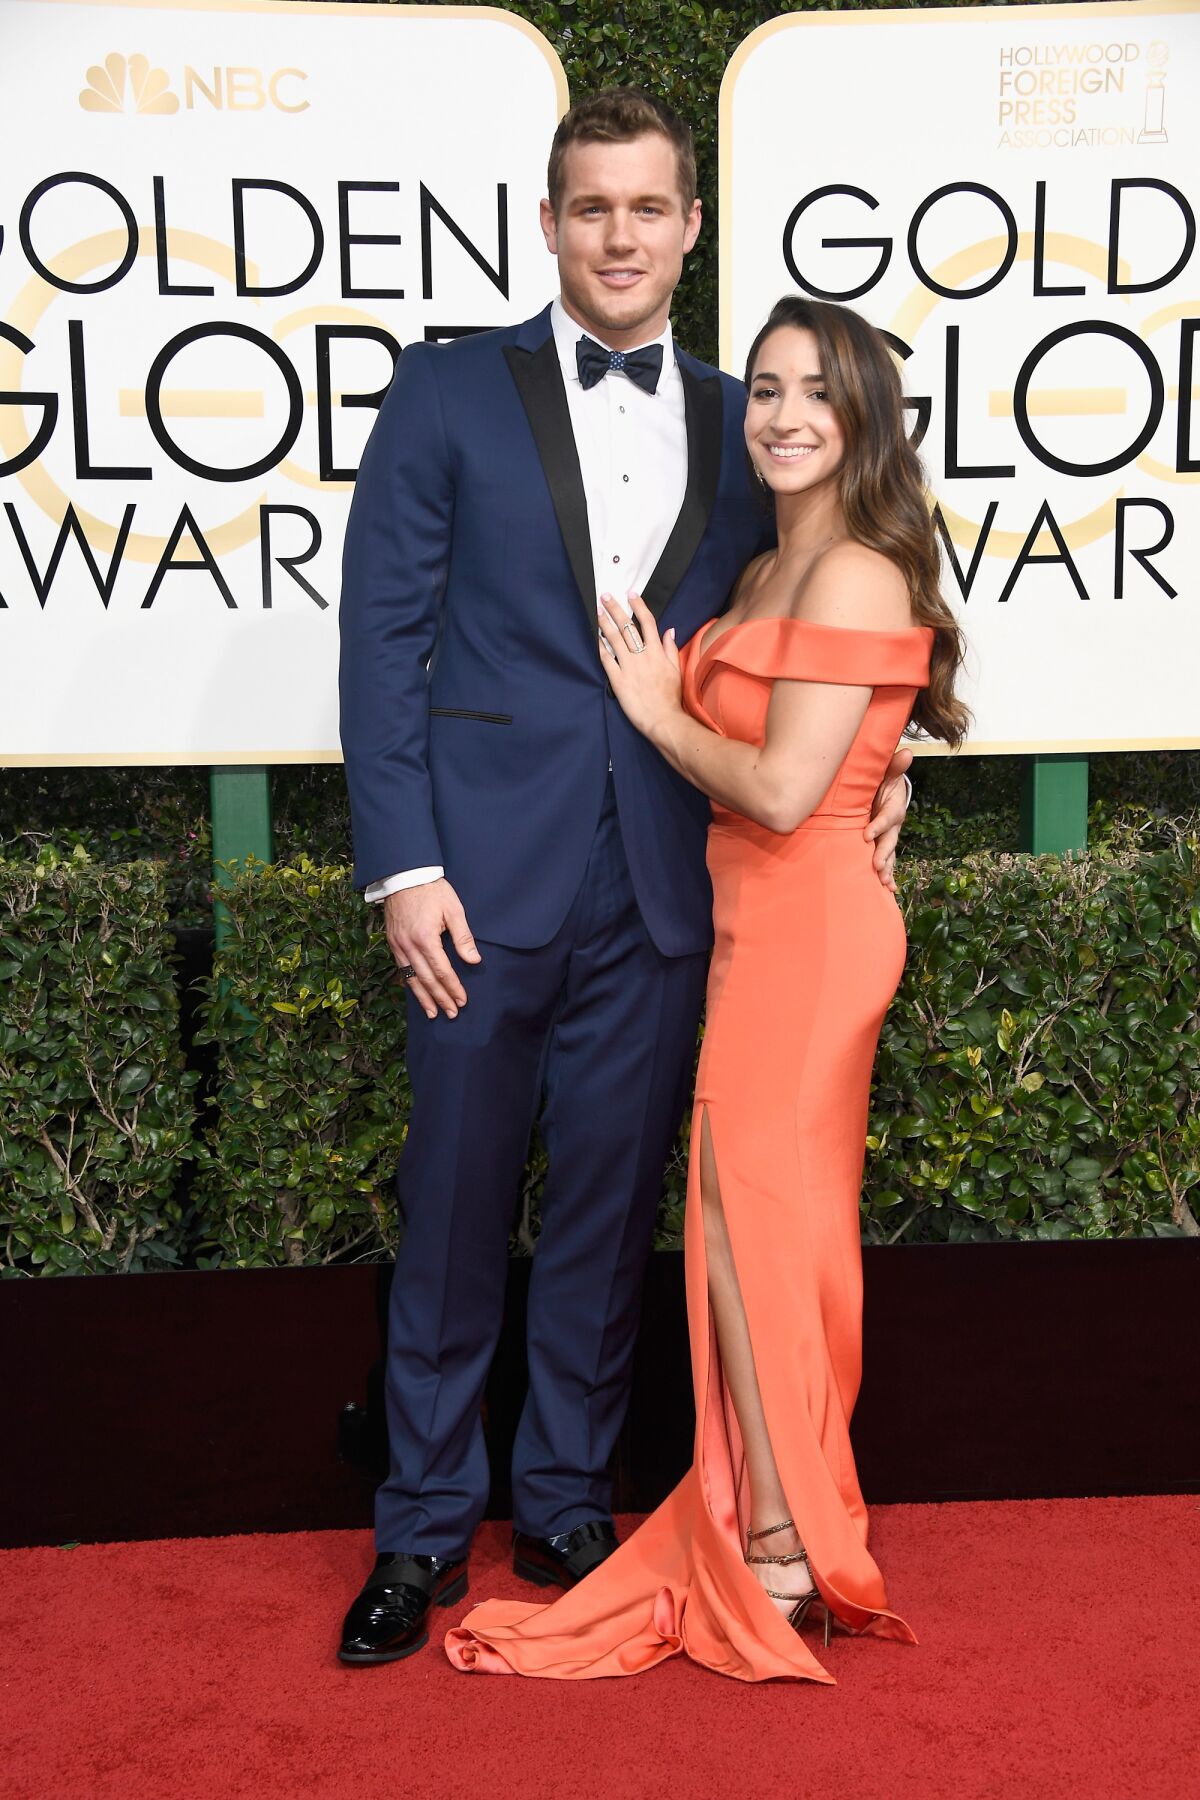 Colton Underwood and gymnast Aly Raisman at the Golden Globe Awards in 2017.